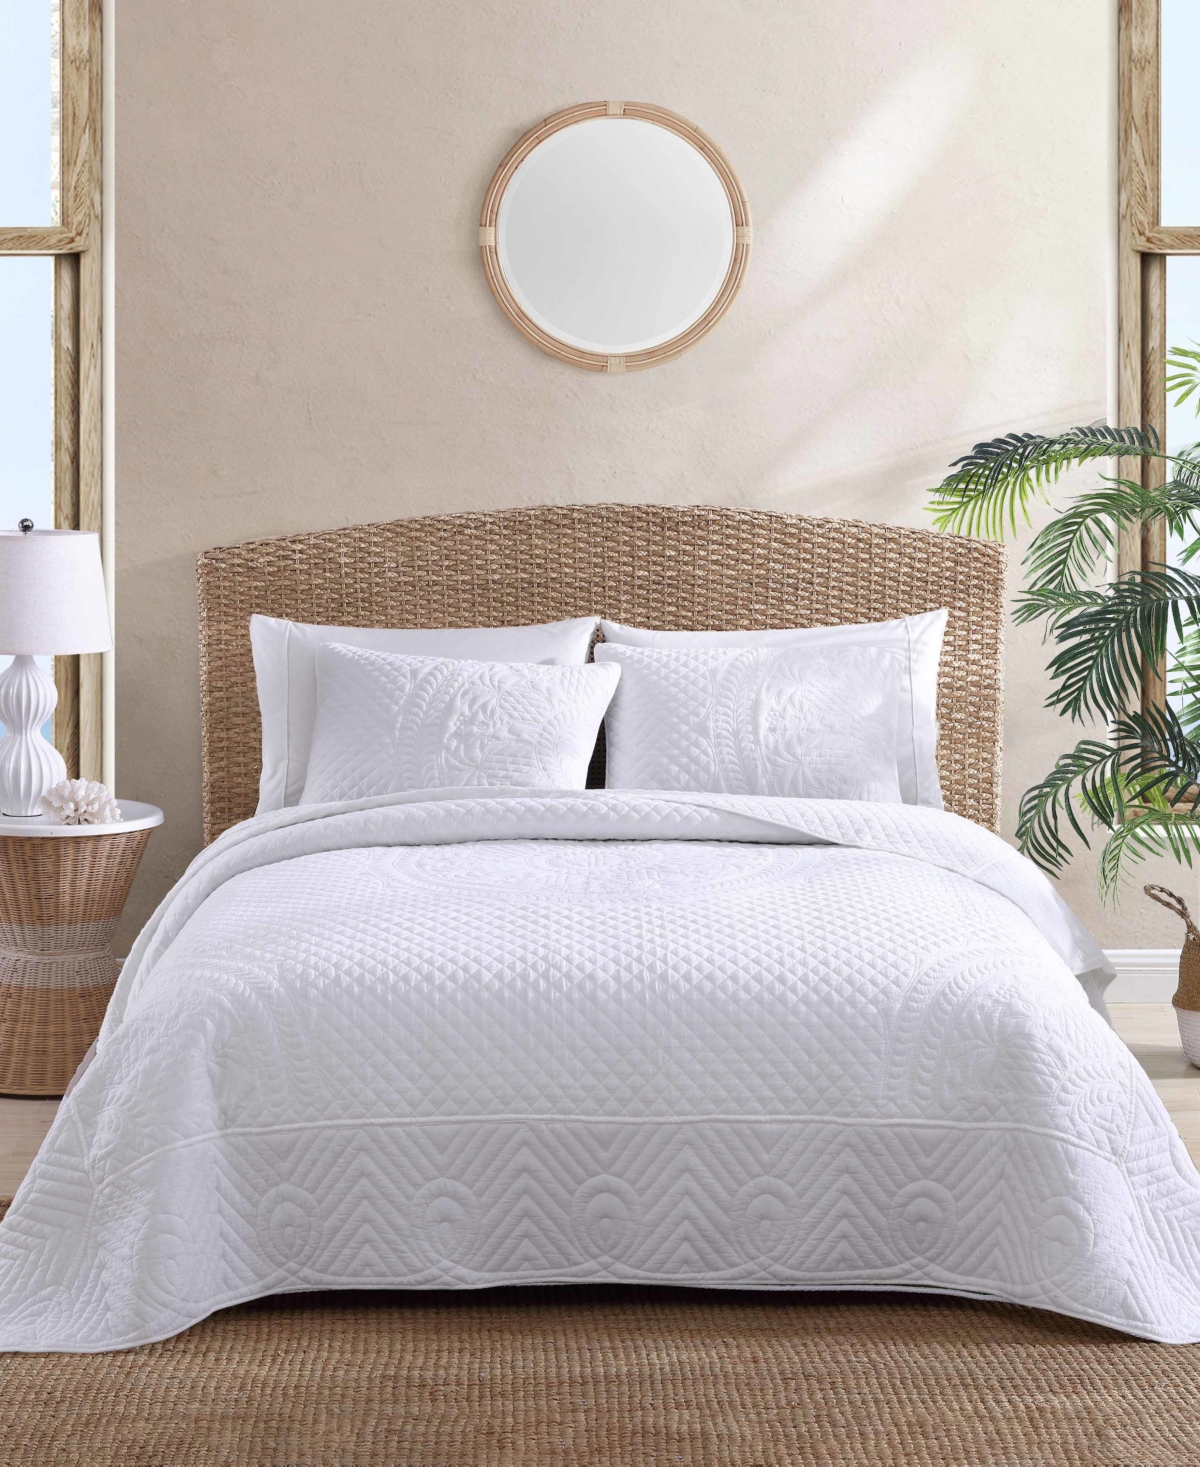 Tommy Bahama Home Pineapple Resort Cotton Quilt, Full/queen In White